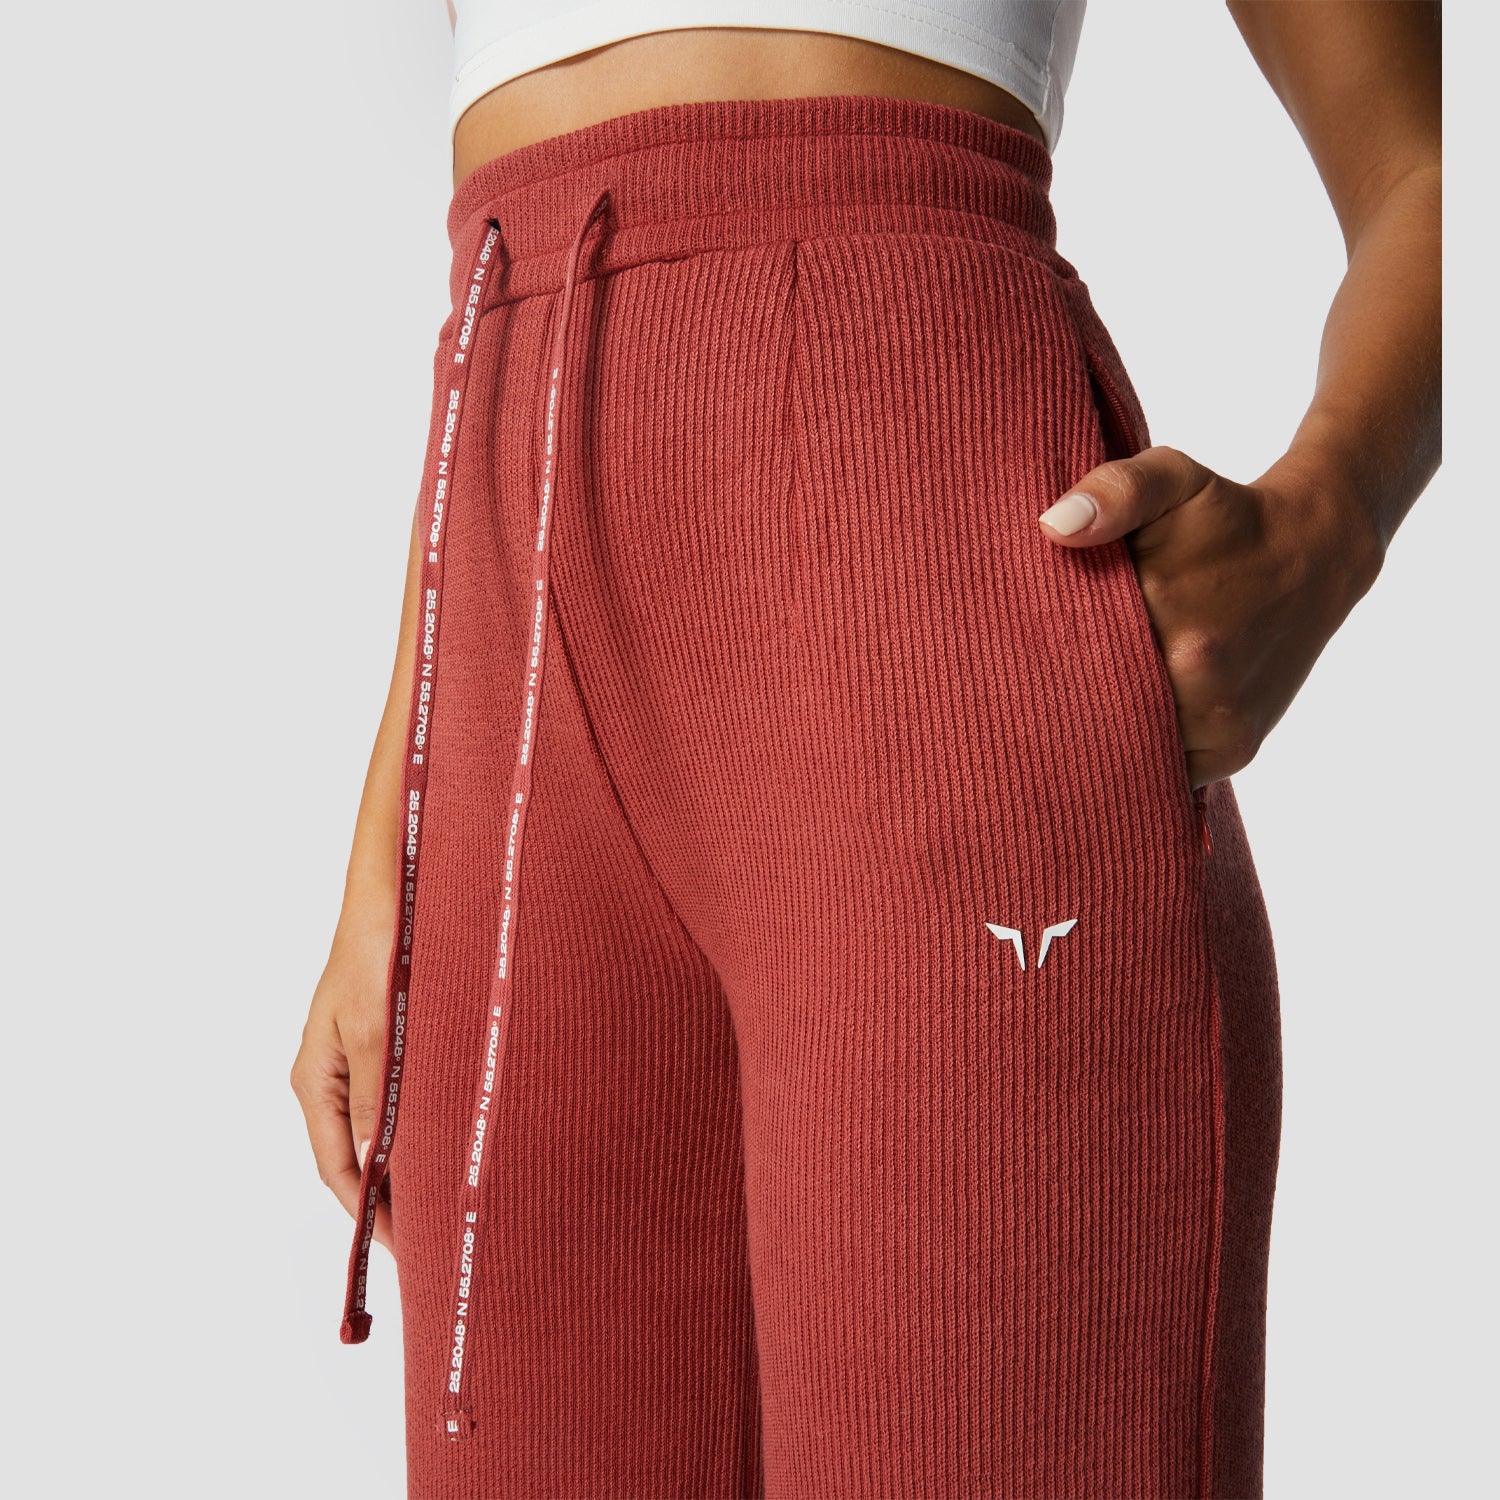 squatwolf-gym-pants-for-women-luxe-wide-leg-pants-baby-red-workout-clothes